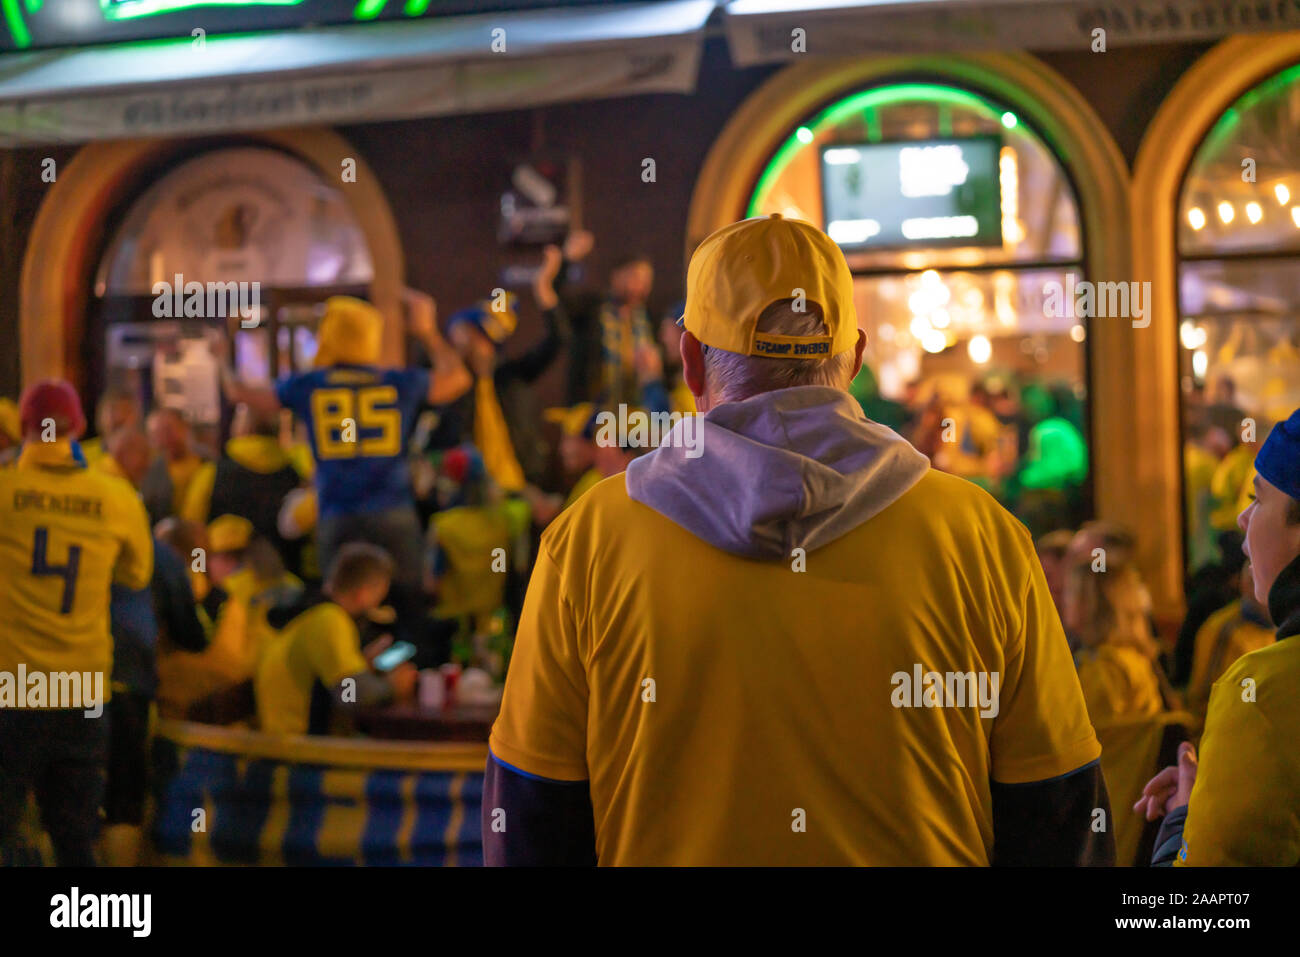 Bucharest, Romania - November 15, 2019: Sweden national football team celebrating the victory of his team in the football match: Swedish vs Romania, w Stock Photo